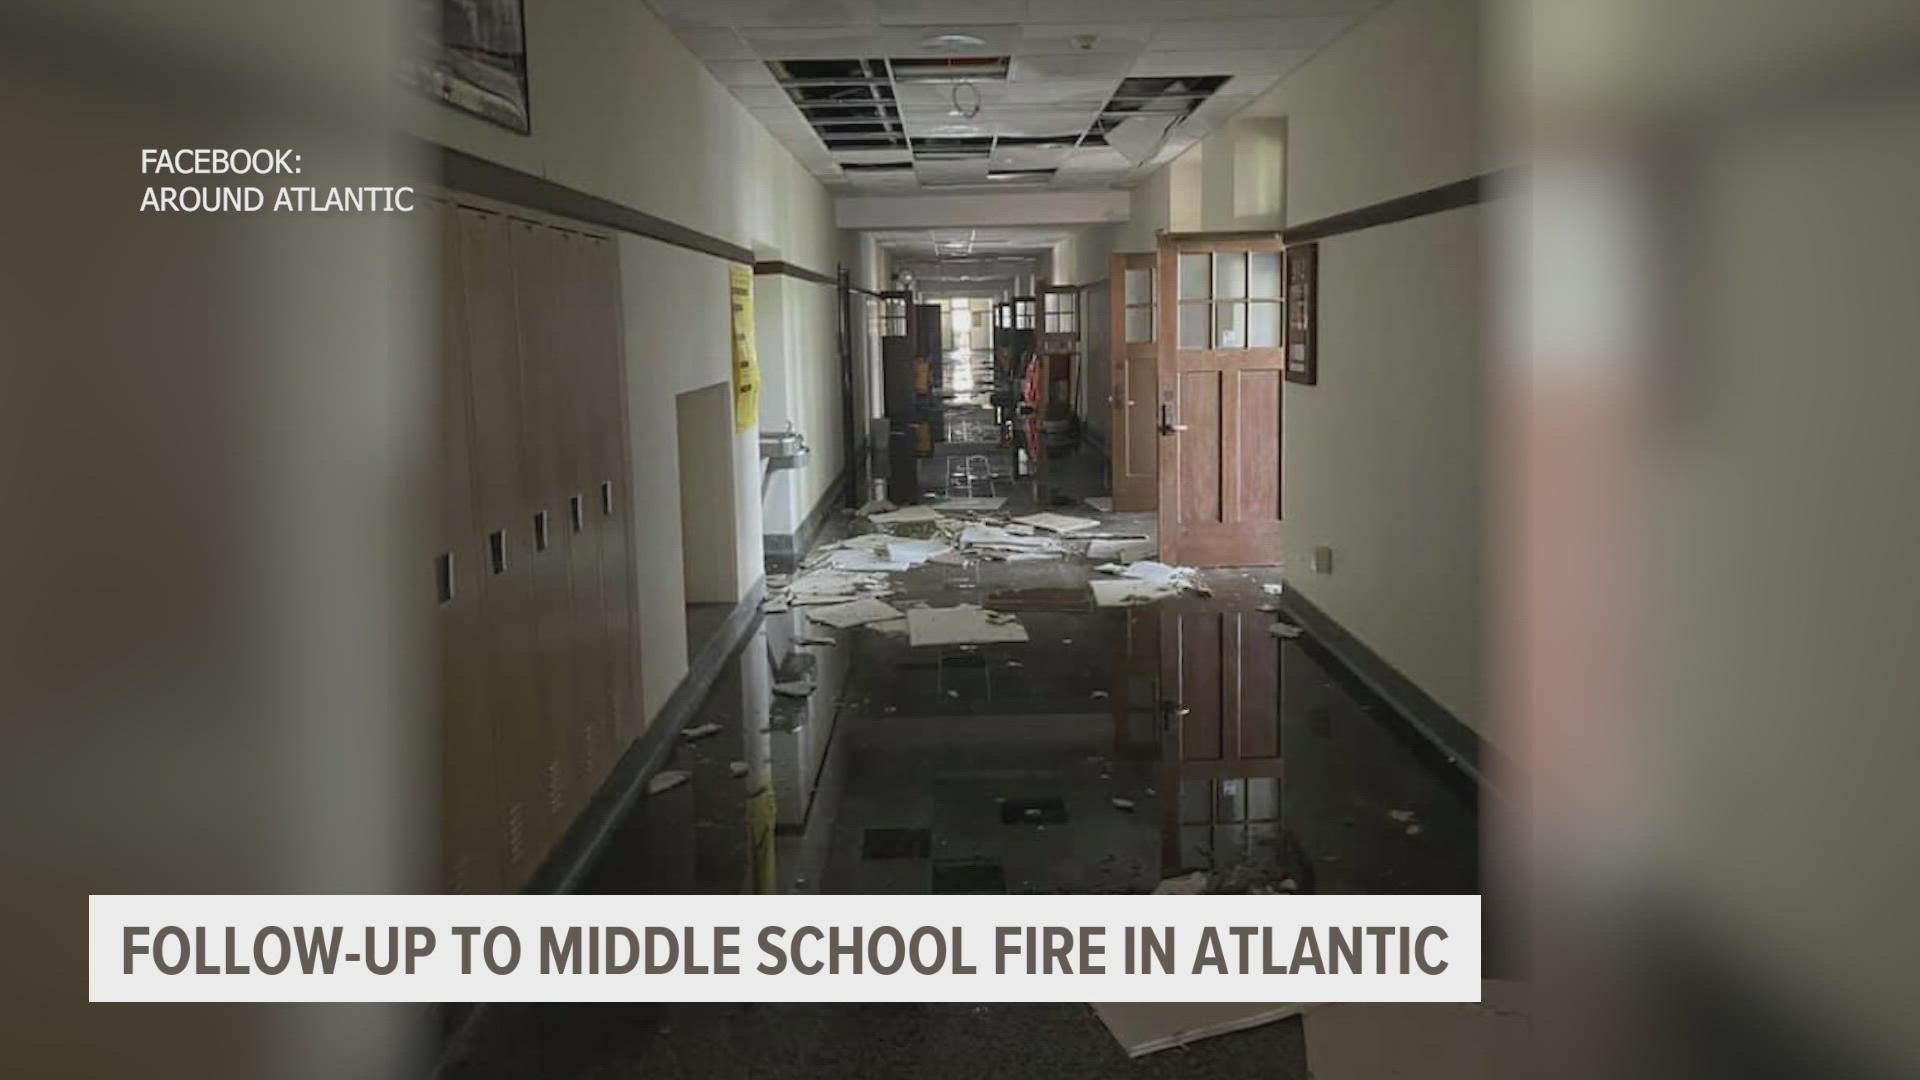 Atlantic Community School District Superintendent Steven Barber said middle school classes will most likely not return to their original building this year.